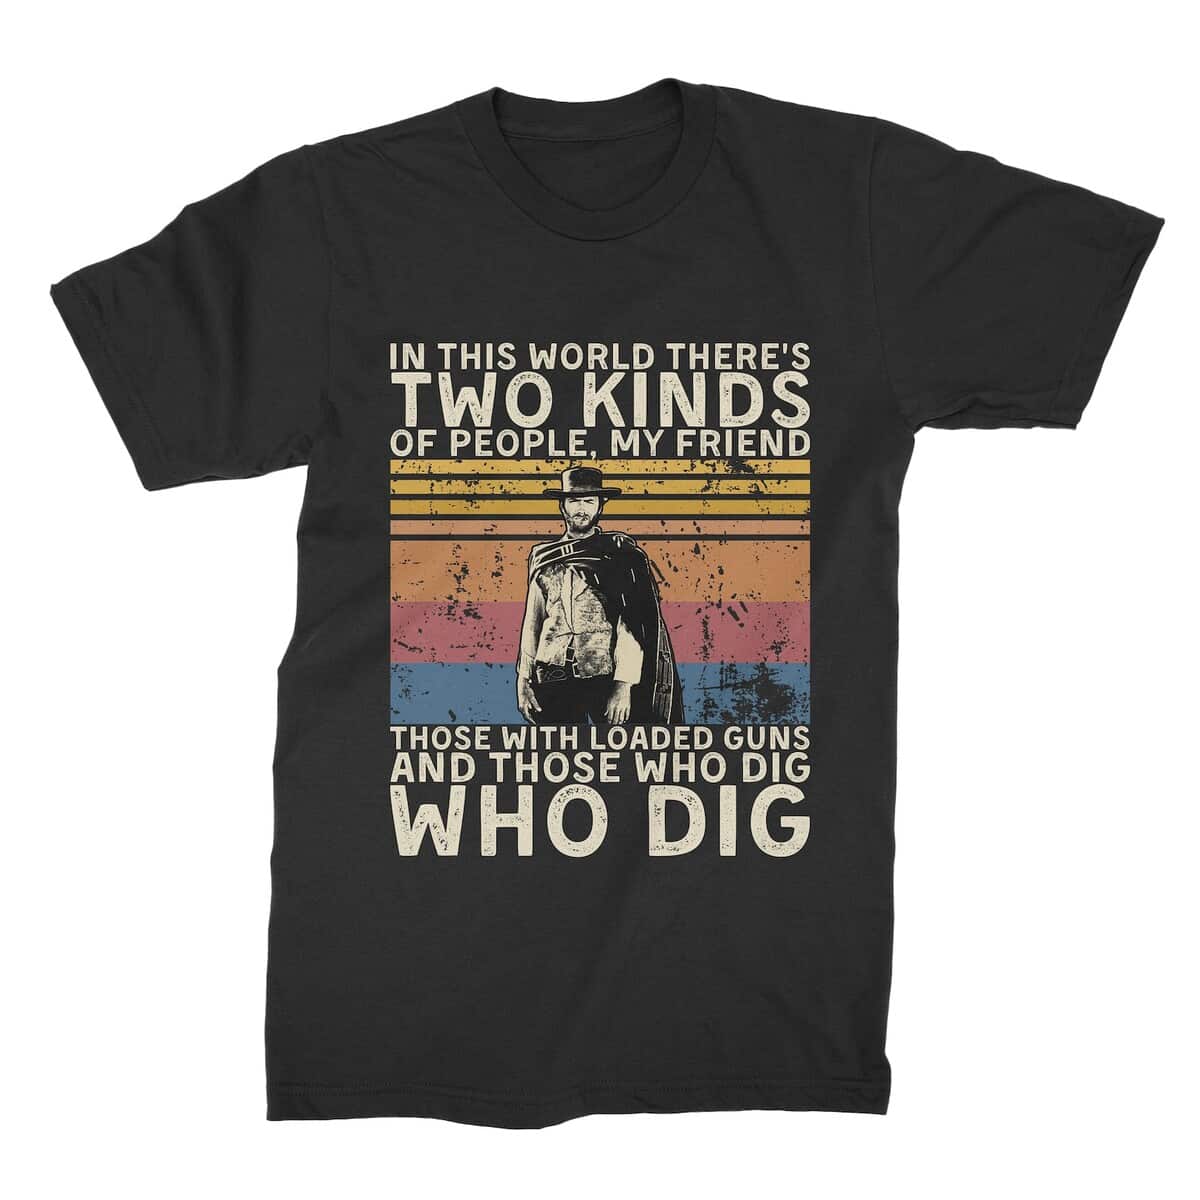 In This World There's Two Kinds of People T-Shirt